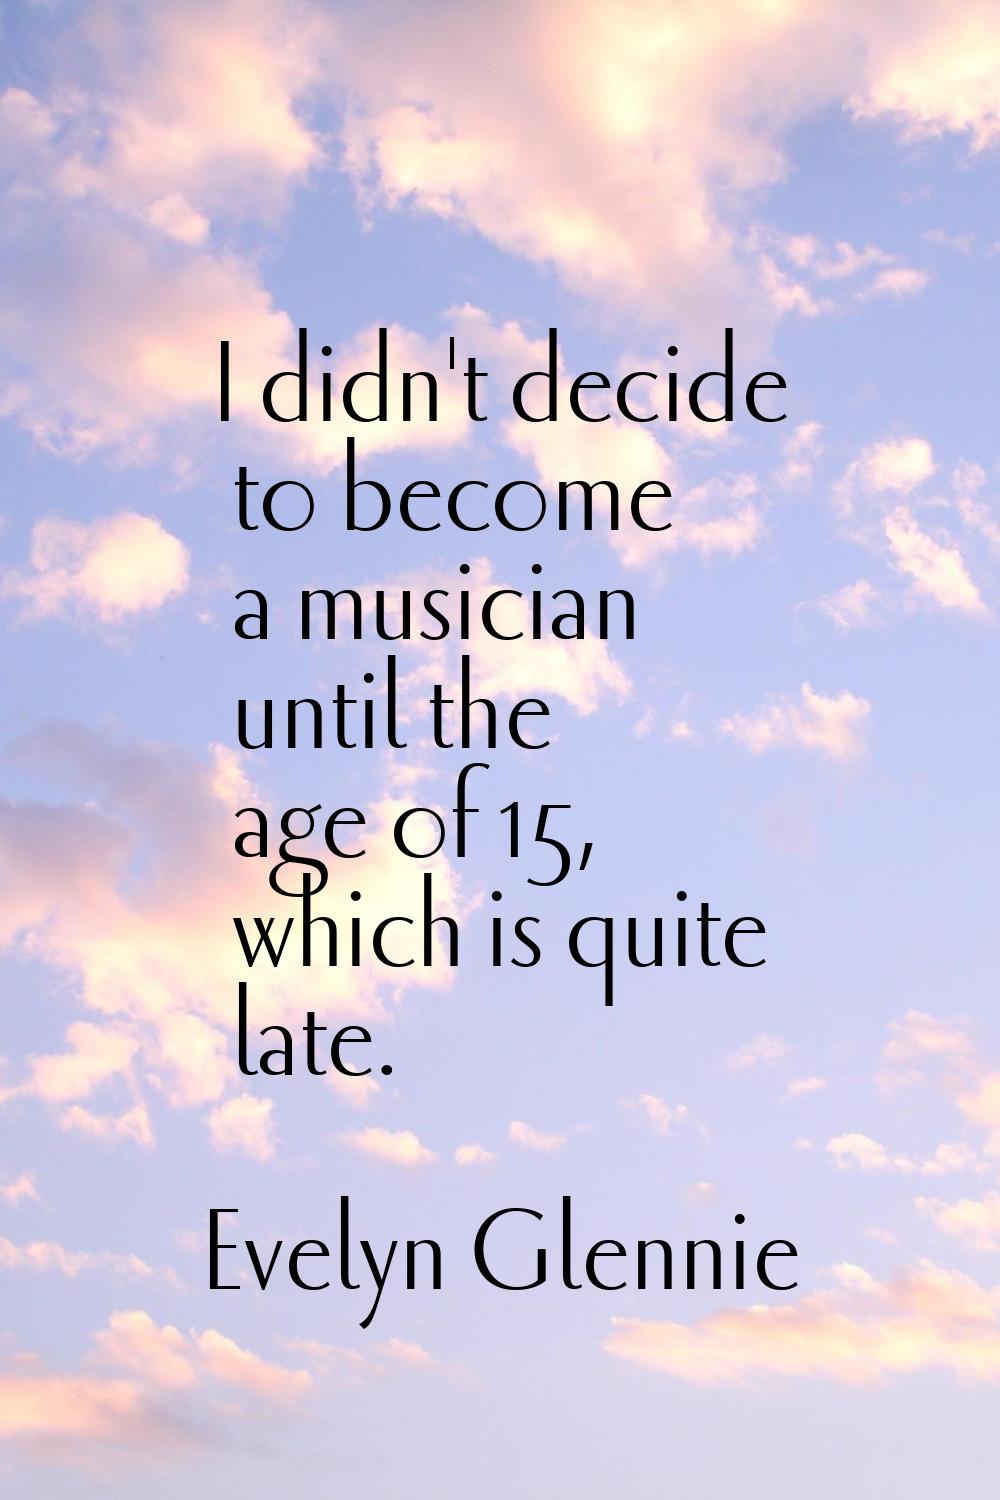 I didn't decide to become a musician until the age of 15, which is quite late.